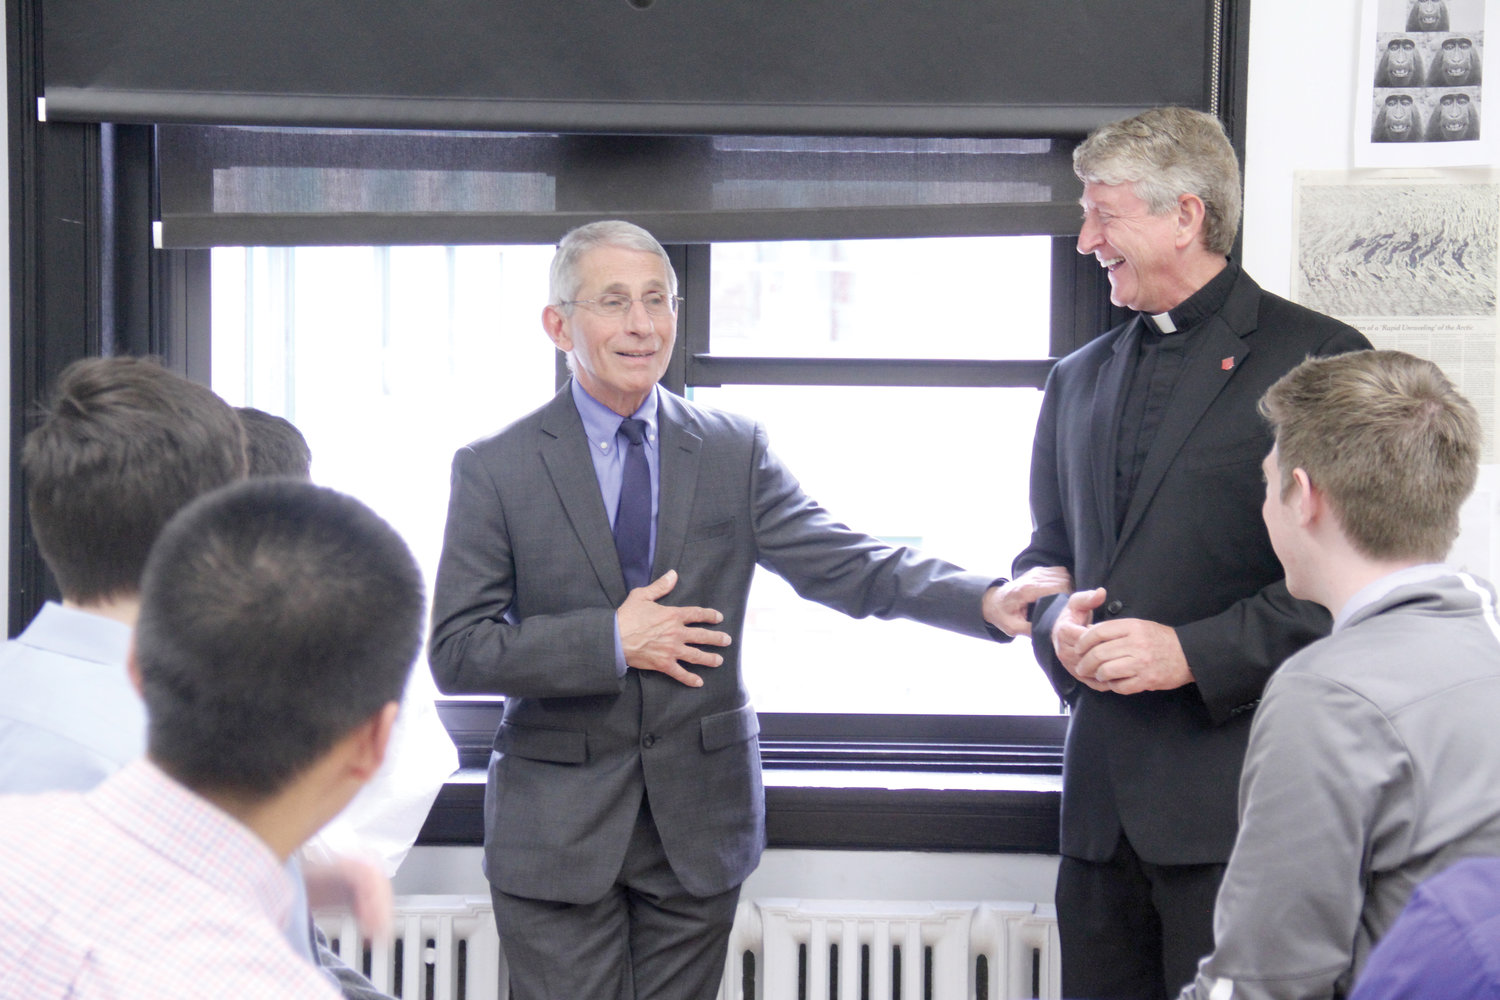 DISTINGUISHED ALUMNUS—Dr. Anthony Fauci meets with Regis High School students and the school’s president, Jesuit Father Daniel Lahart, in 2019. Dr. Fauci graduated from the school in 1958.